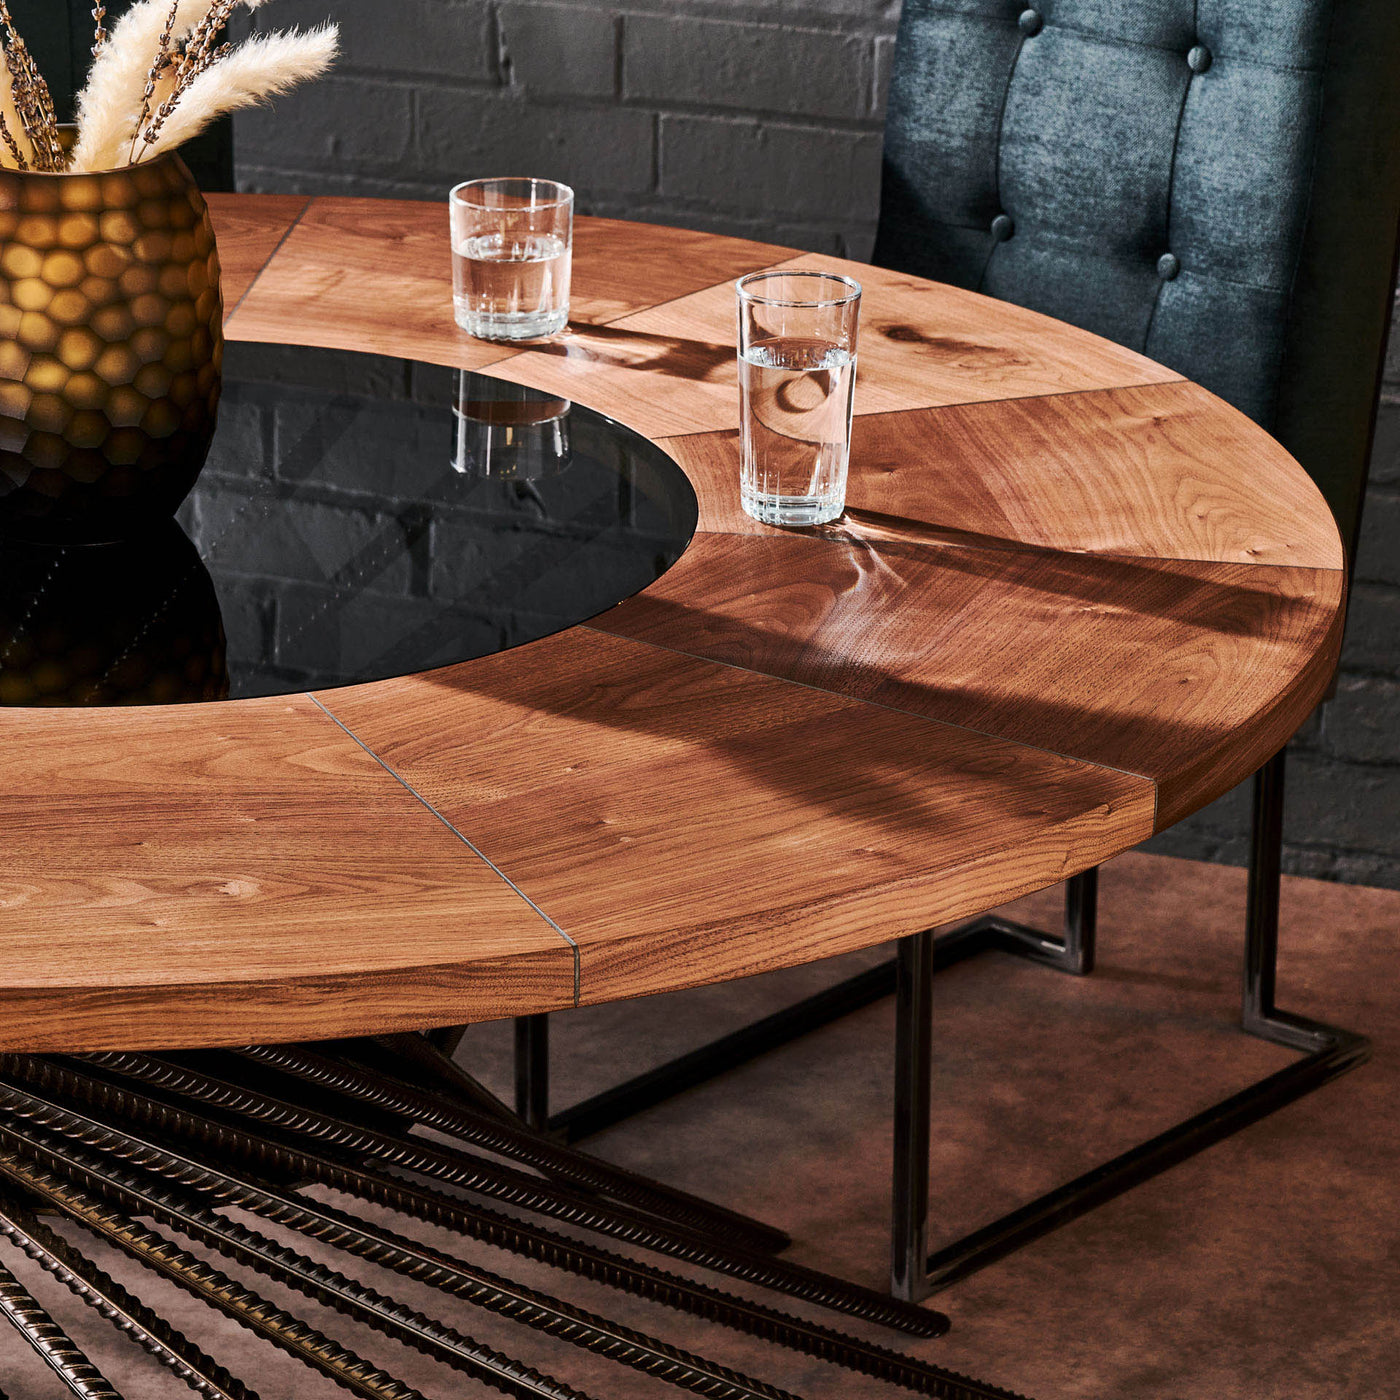 Industrial Dining Table with Handcrafted Rebar Leg Design Plus Wood and Glass Tabletop